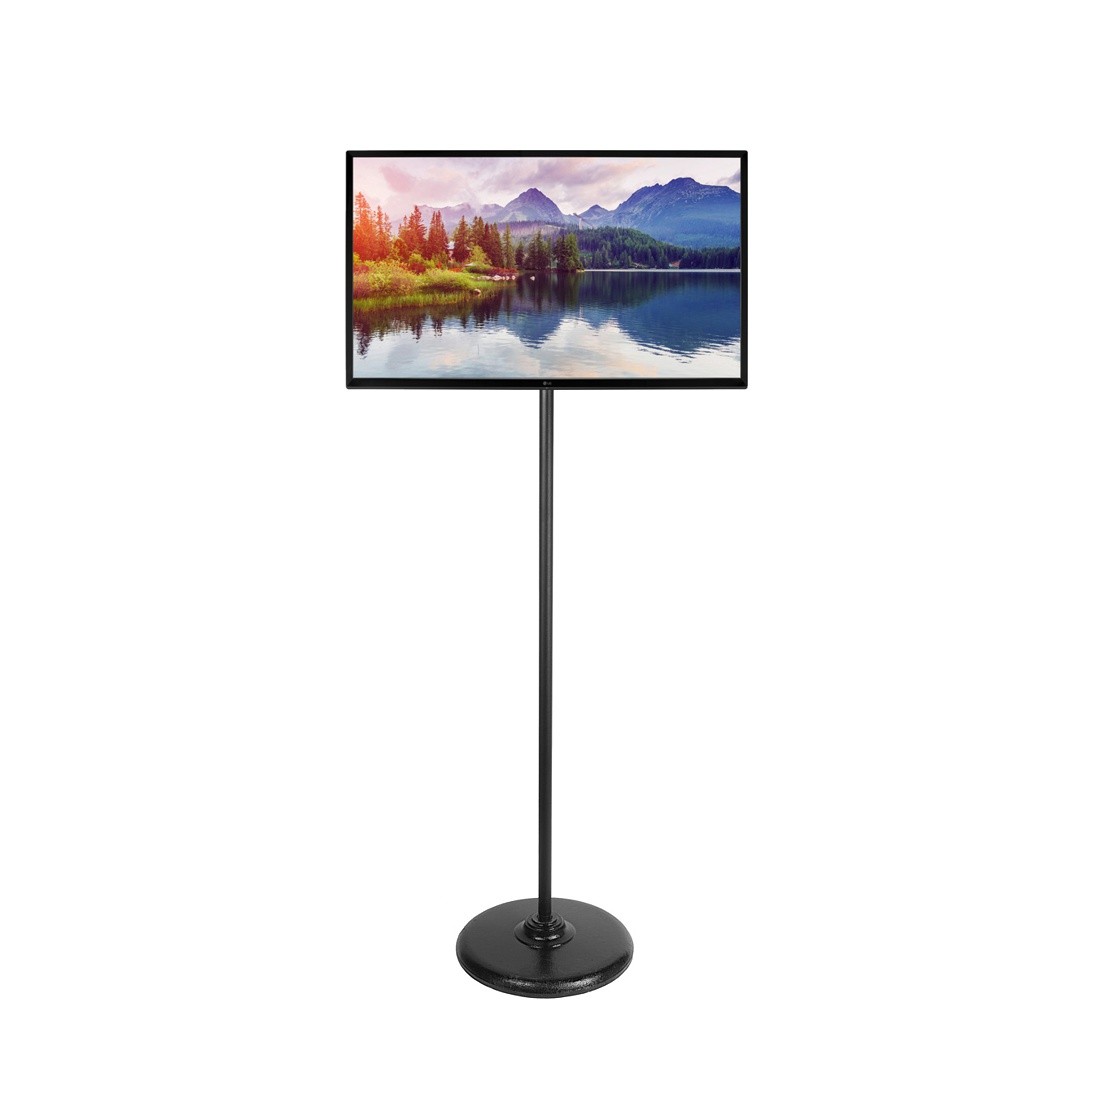 LED Monitor Floor Stand - up to 37"